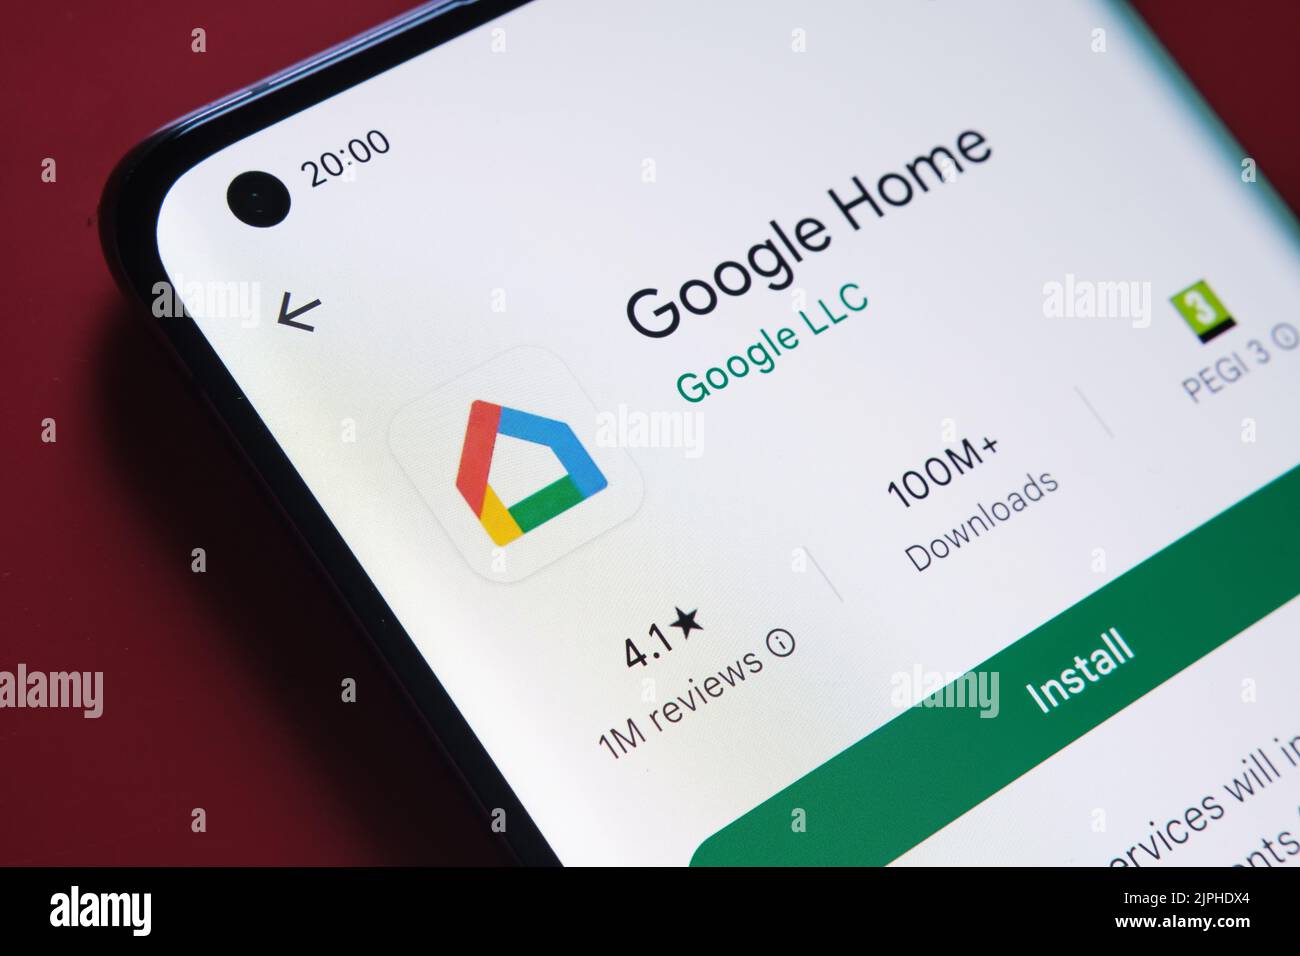 google home app seen in Google Play Store on the smartphone screen placed on red background. Close up photo with selective focus. Stafford, United Kin Stock Photo